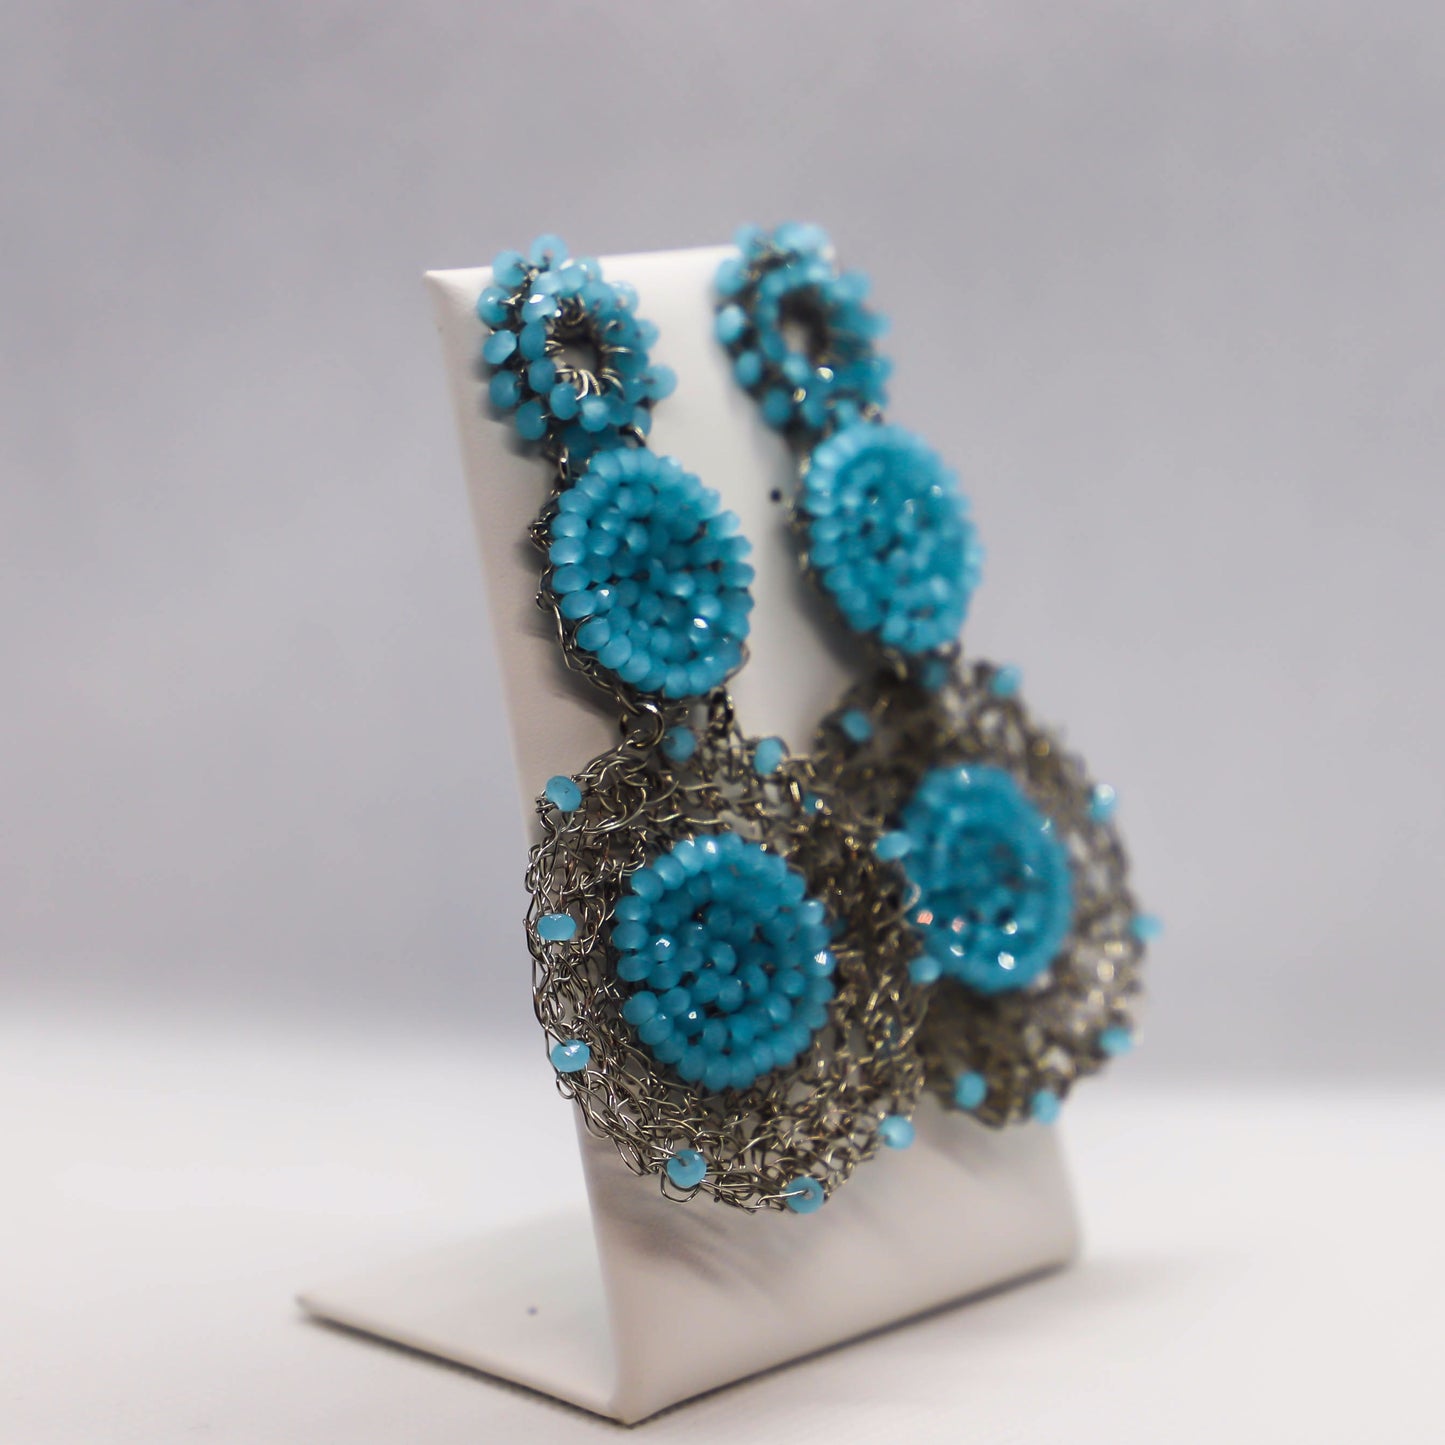 Hand crocheted circle drop earrings with light blue crystal accents